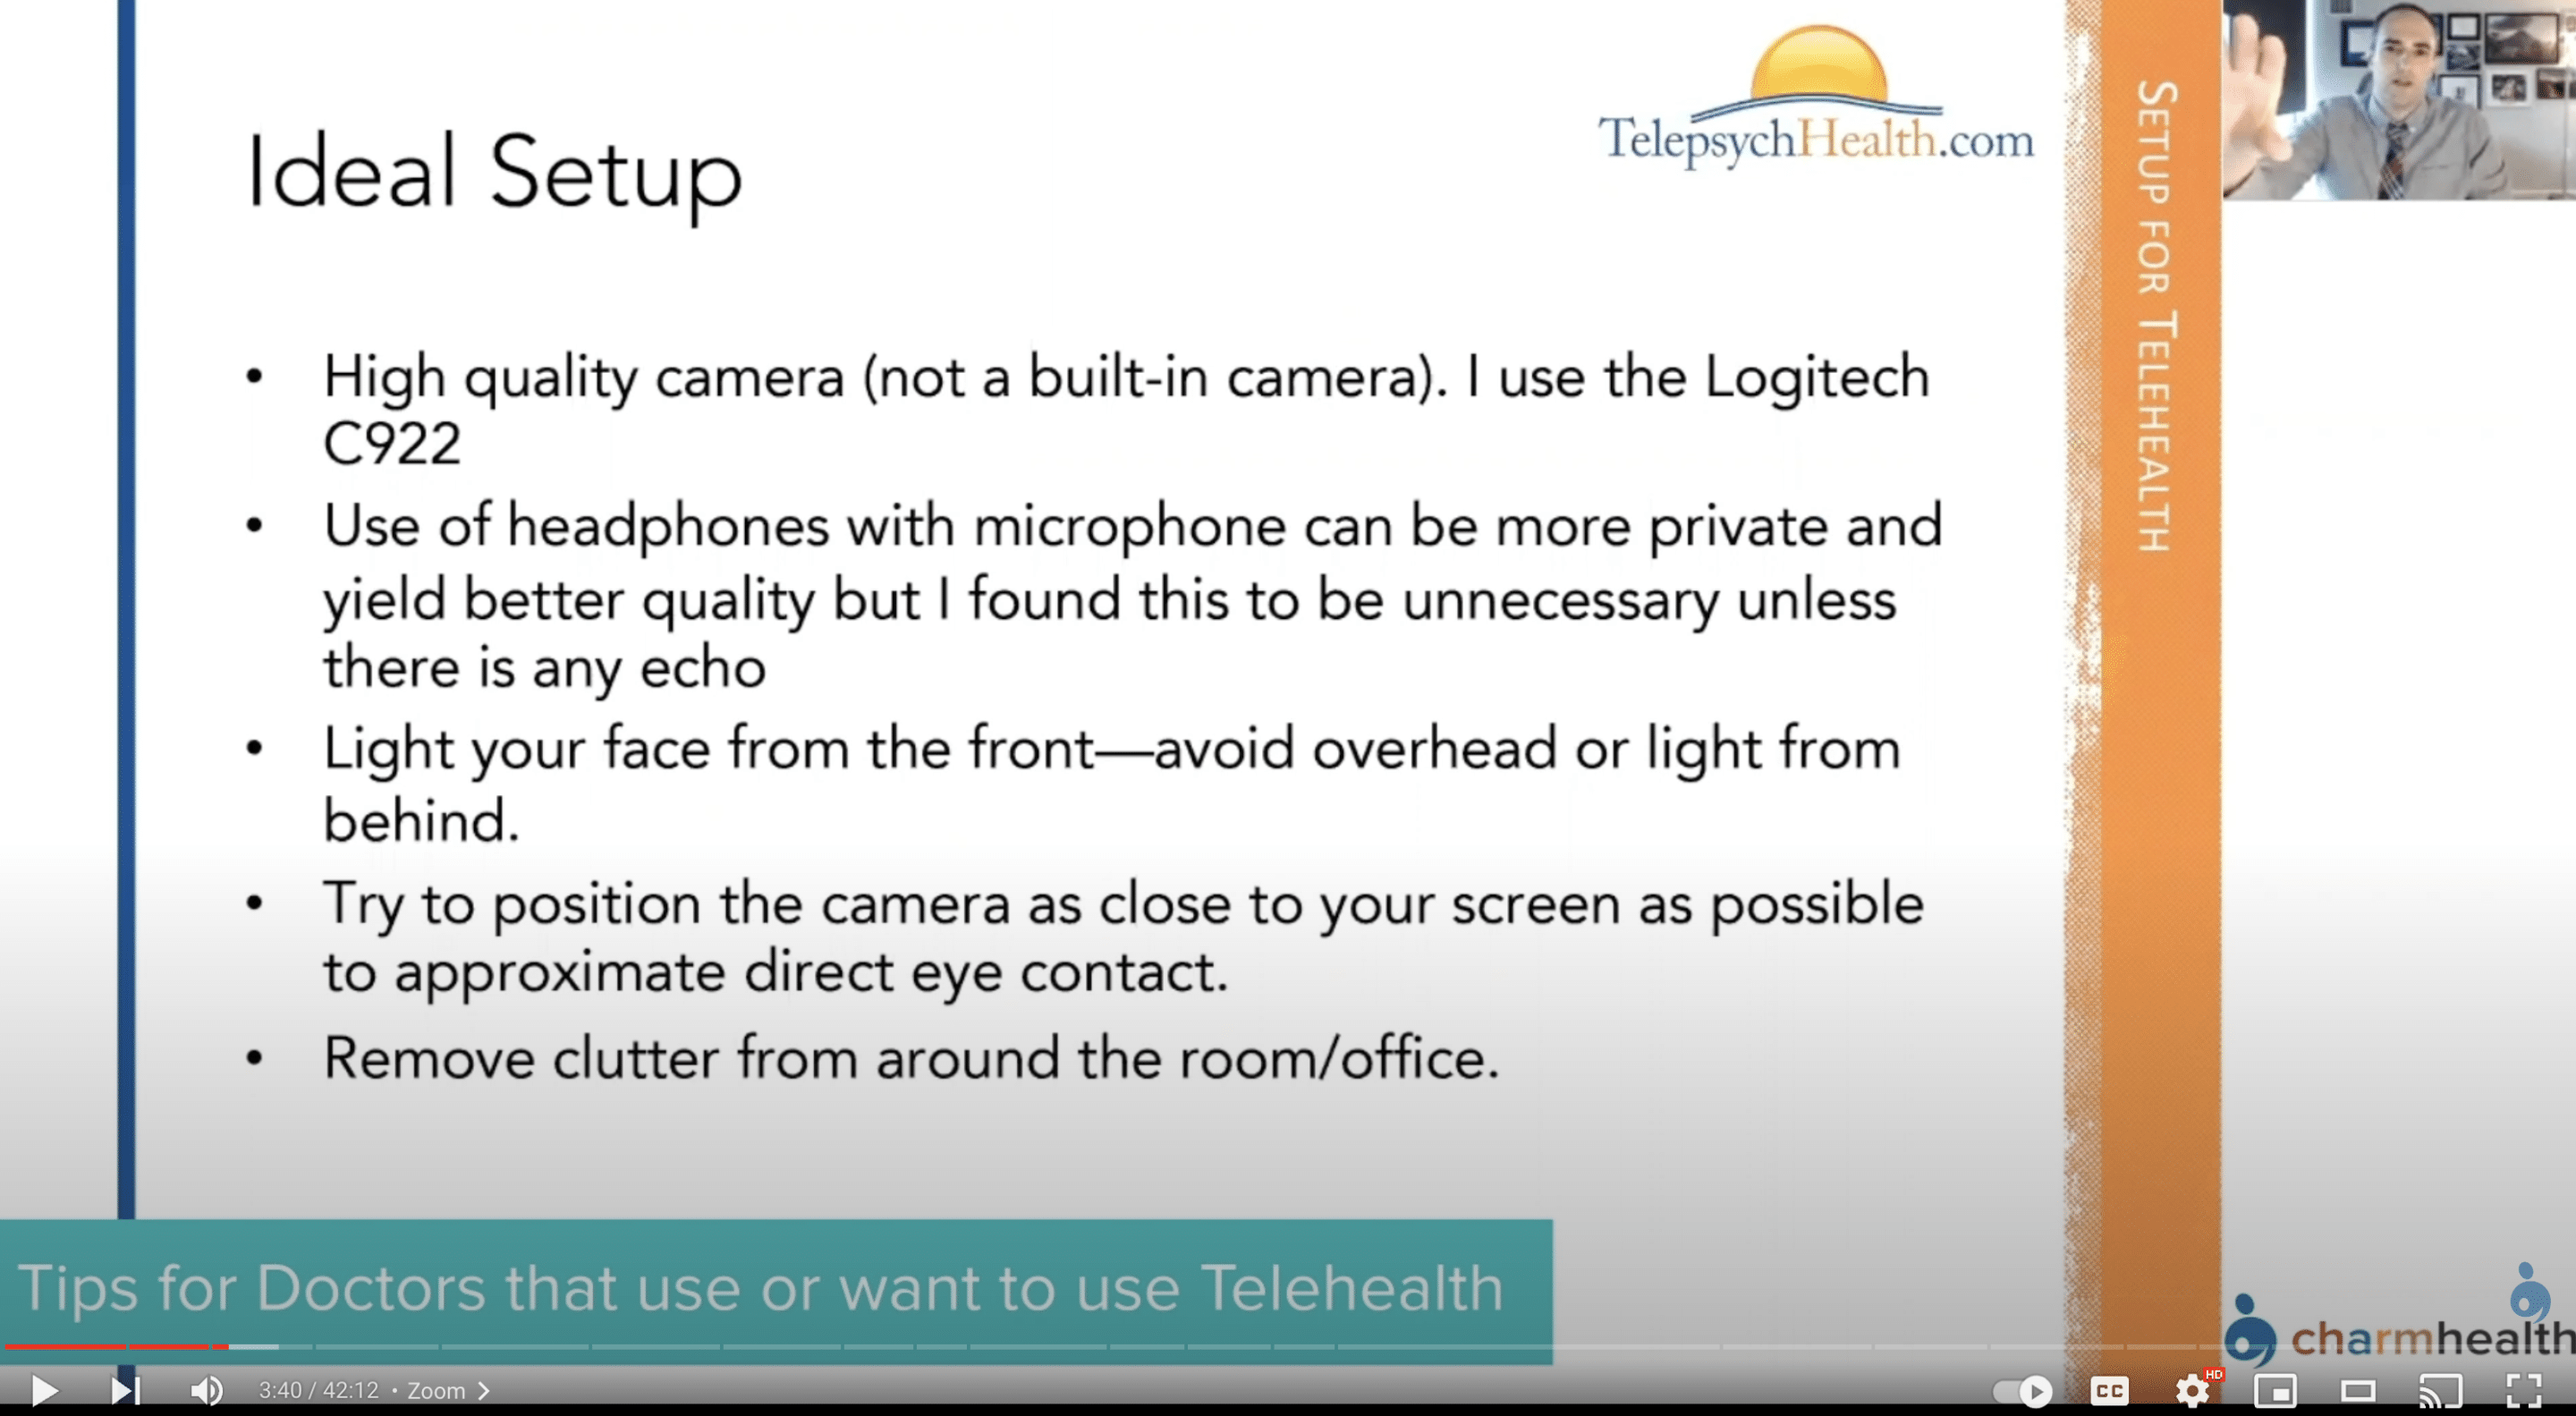 Telehealth tips for physicians